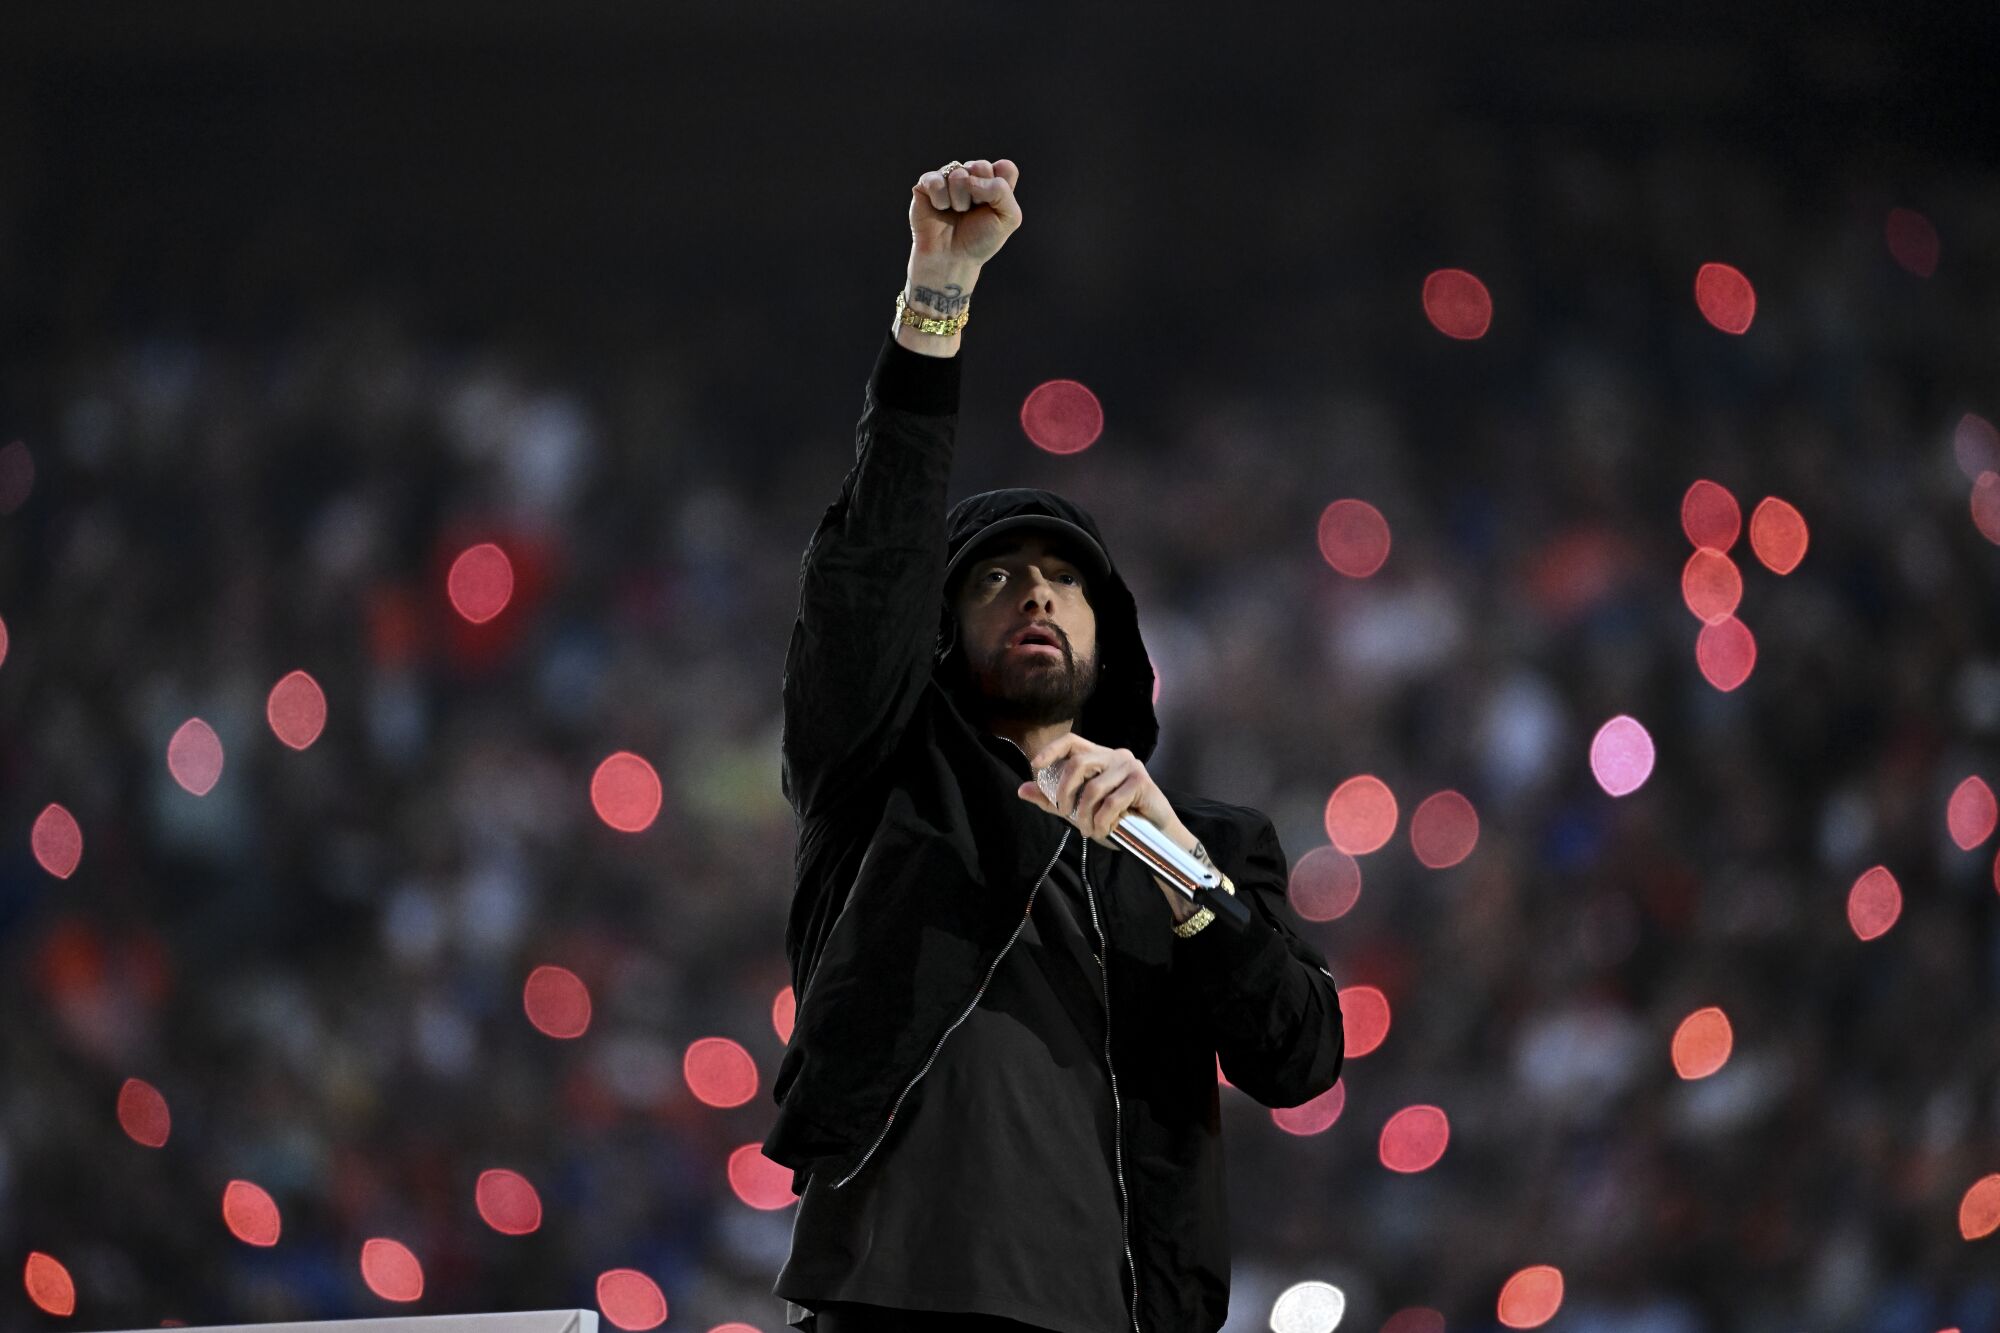 A man in a black hoodie holds a microphone in one hand and holds the other up in a salute.